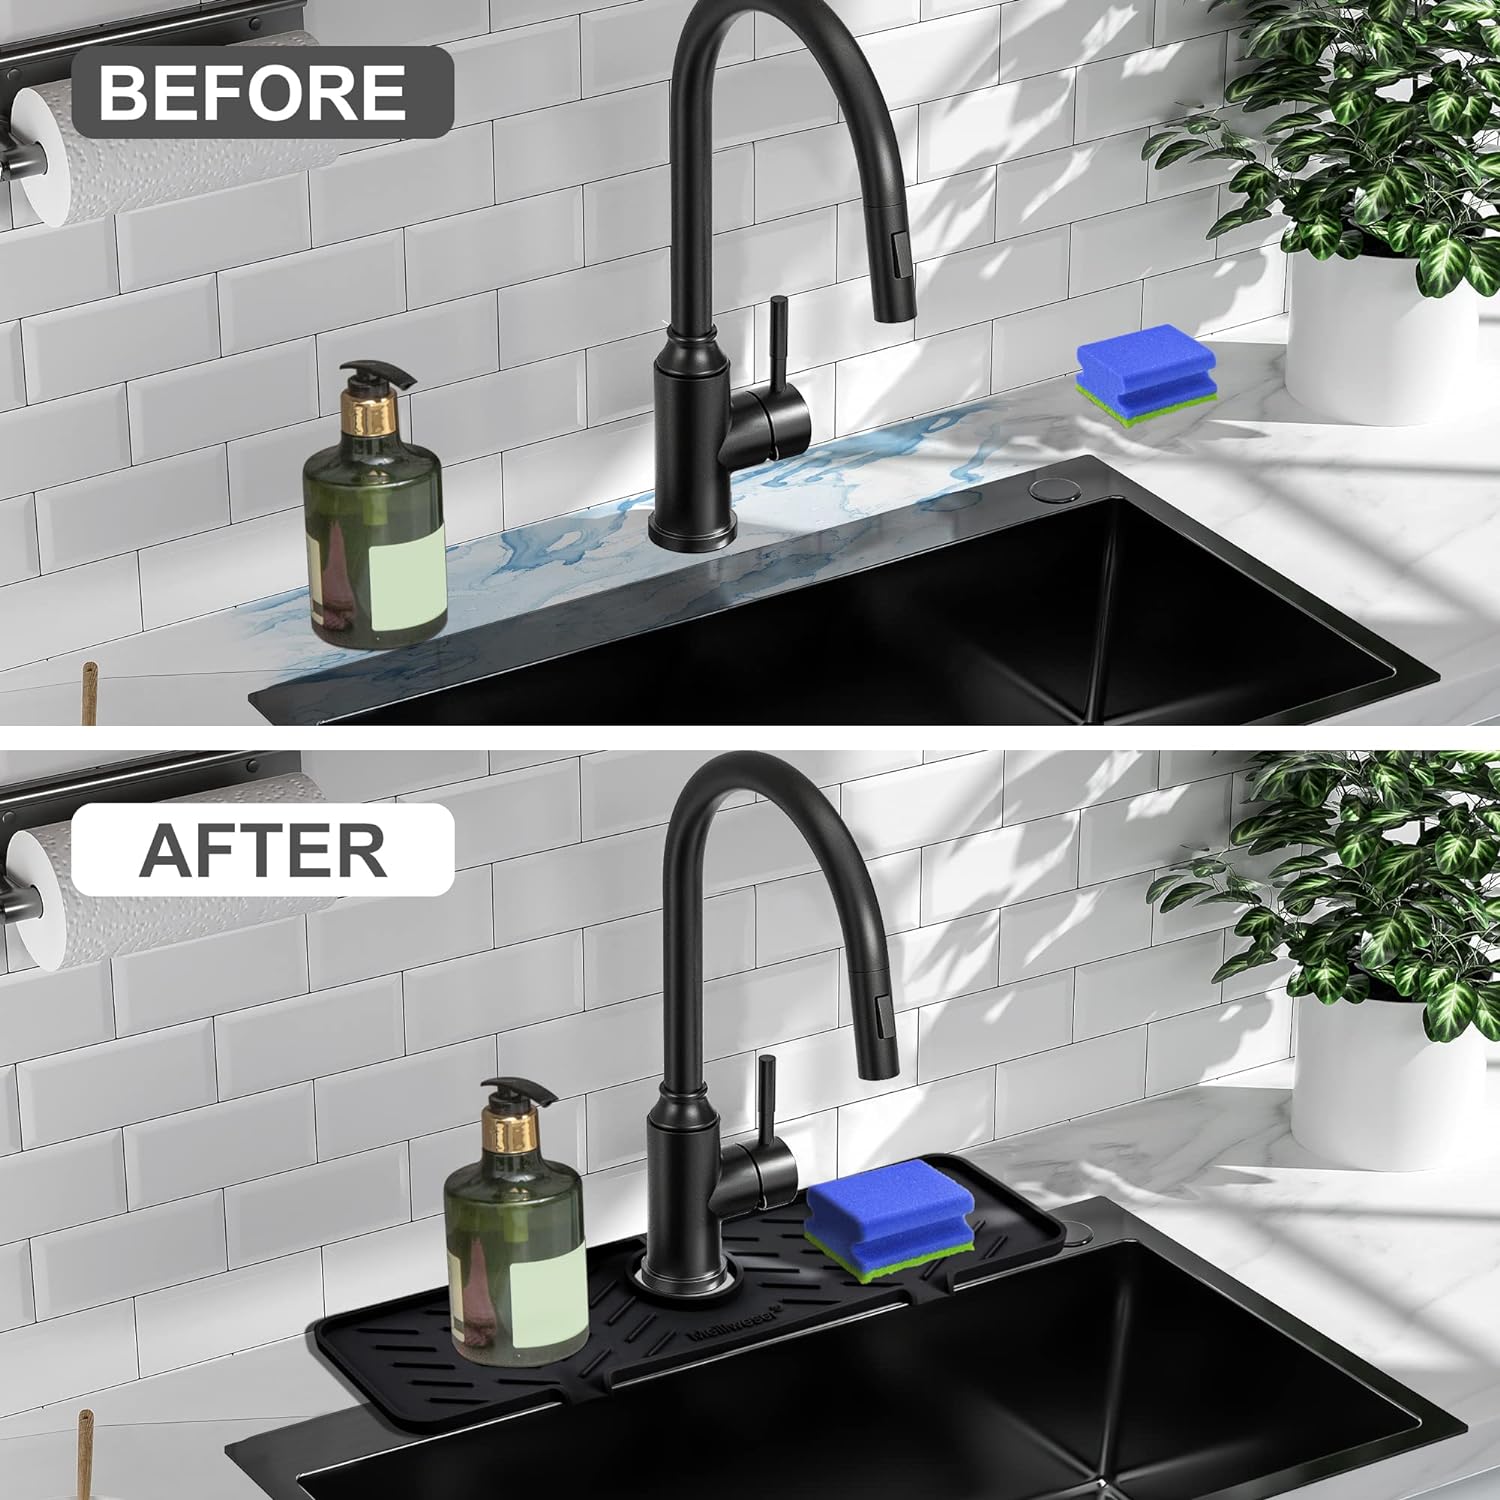 Wholesale prices with free shipping all over United States Meiliweser Silicone Faucet Splash Guard Gen 2 - Outlet & Slope Upgraded Faucet Water Catcher Mat - 18” x 5.1” - Sink Sponge Holder for Kitchen, Bathroom(Black) - Steven Deals